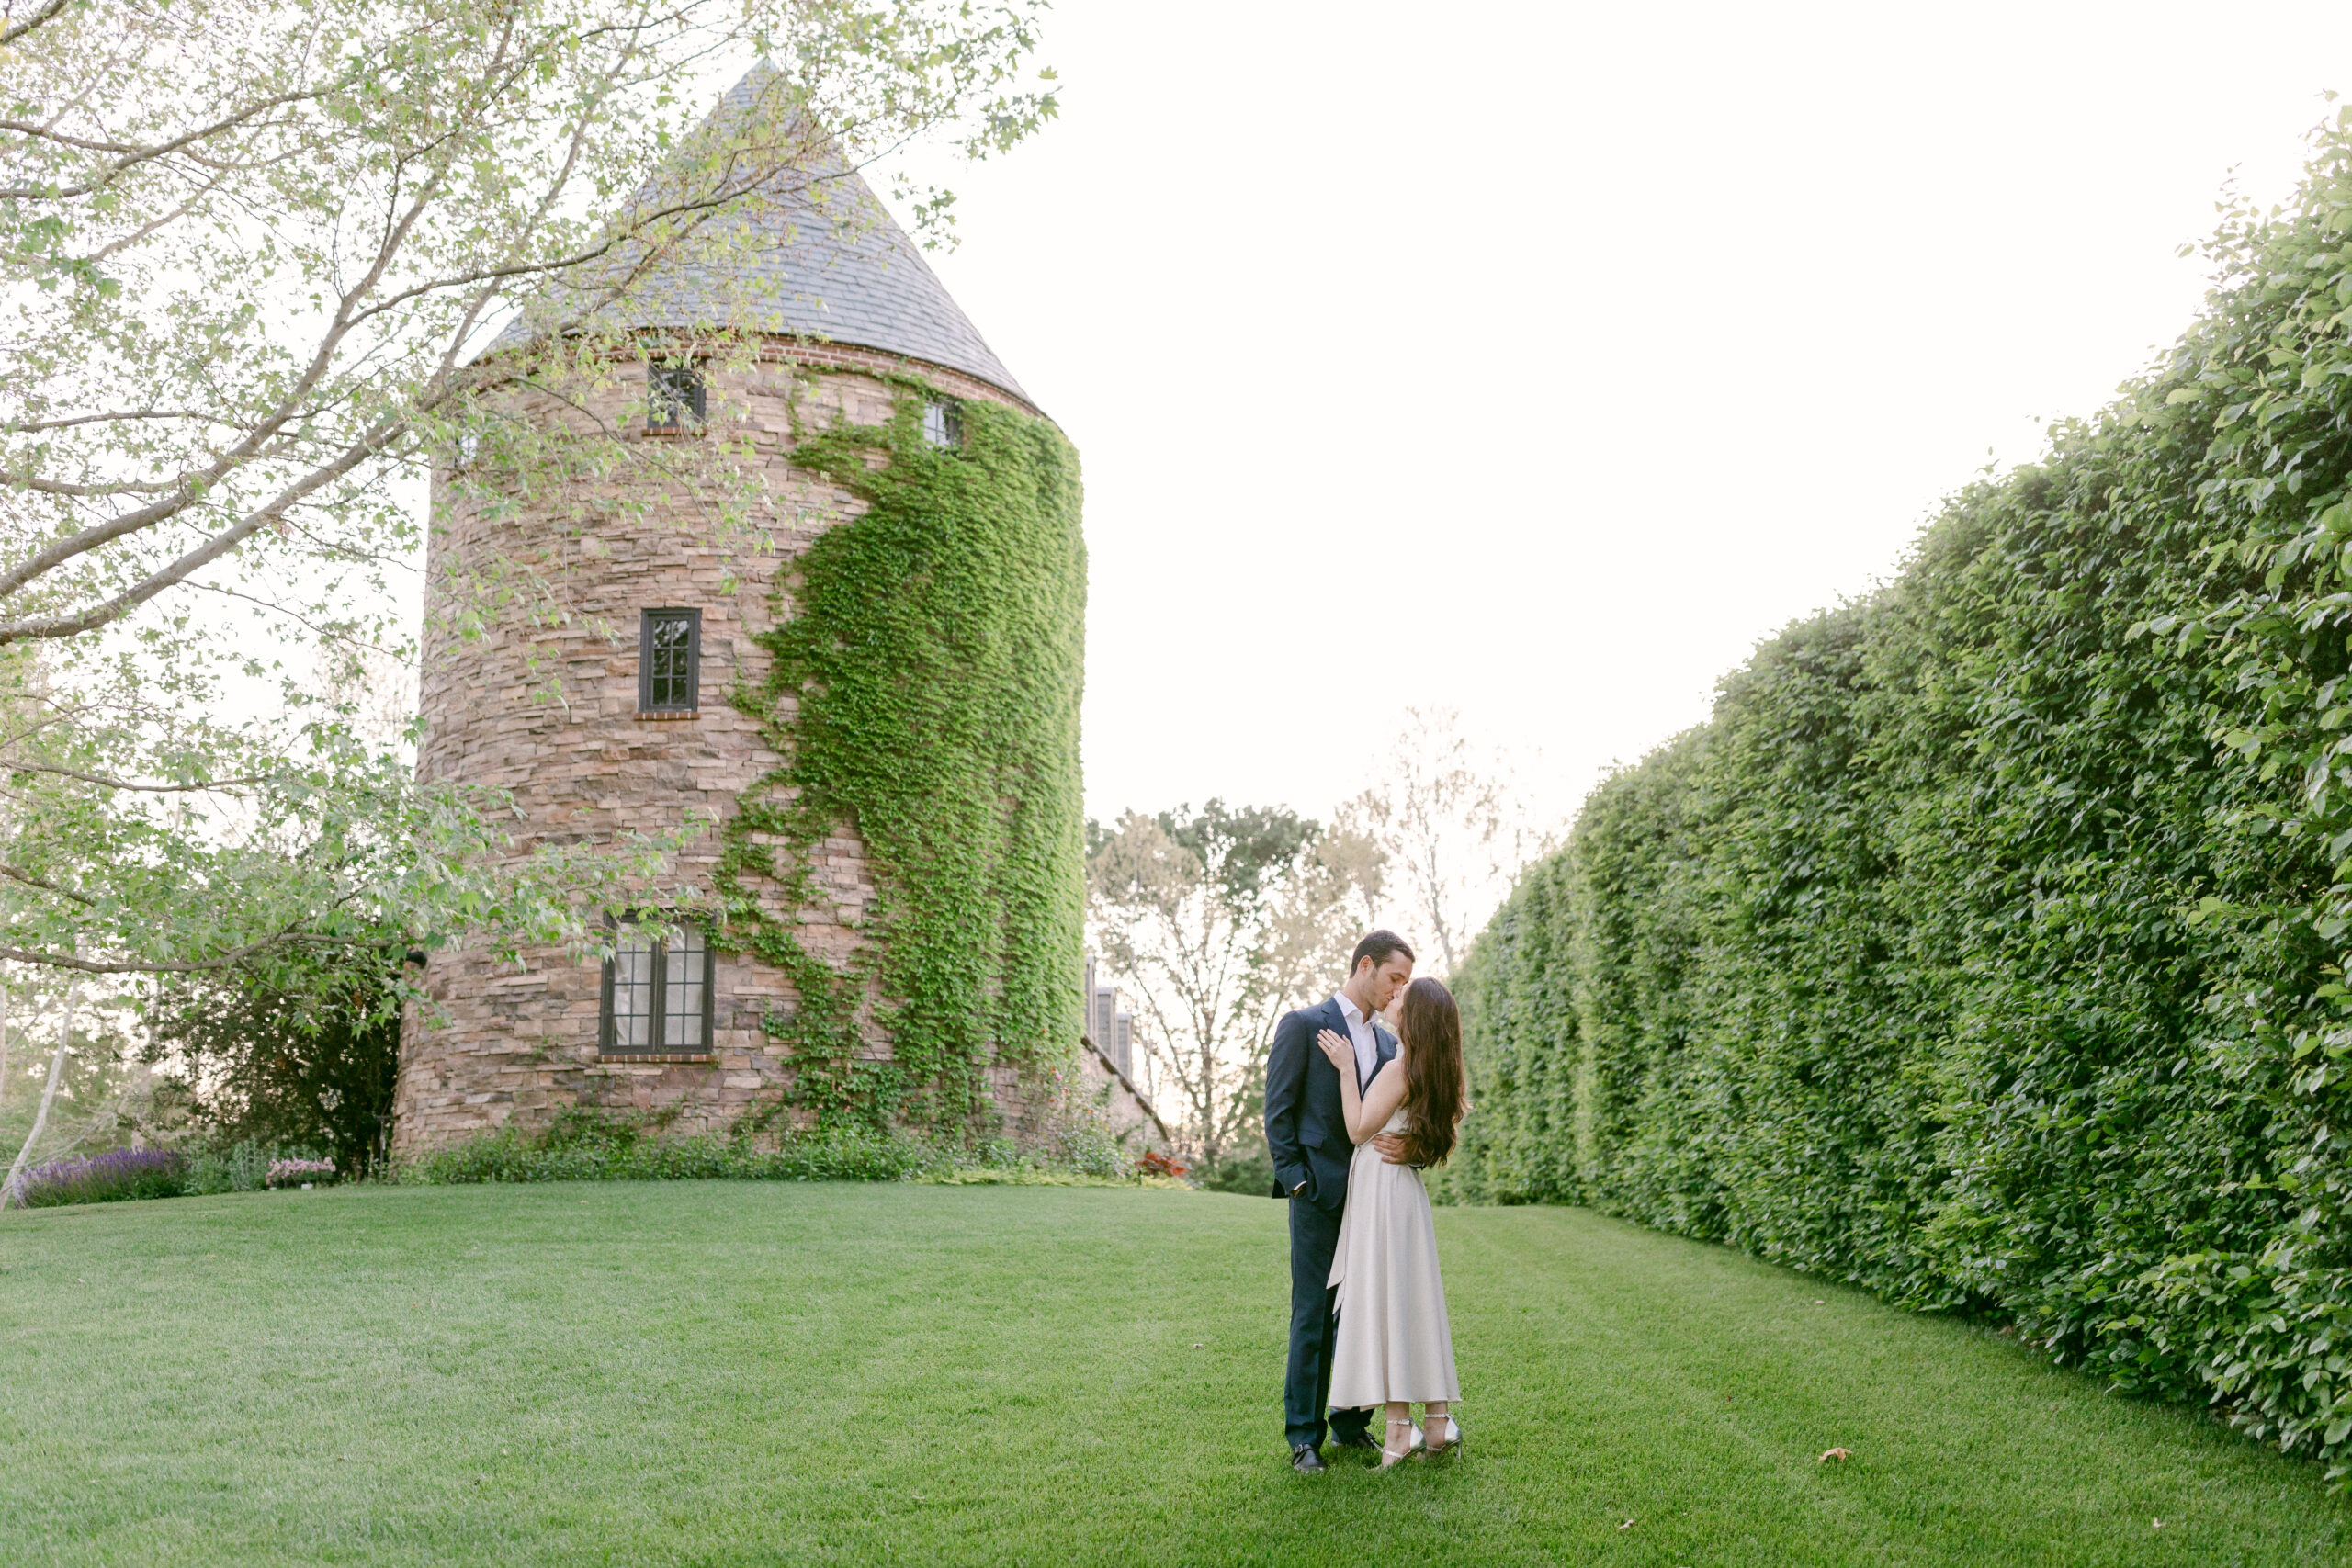 Bride and Groom to be embrace on a lush lawn in front of a beautiful French dovecote at Kestrel Park during their engagement session with Santa Ynez Wedding Photographer, Tiffany J Photography